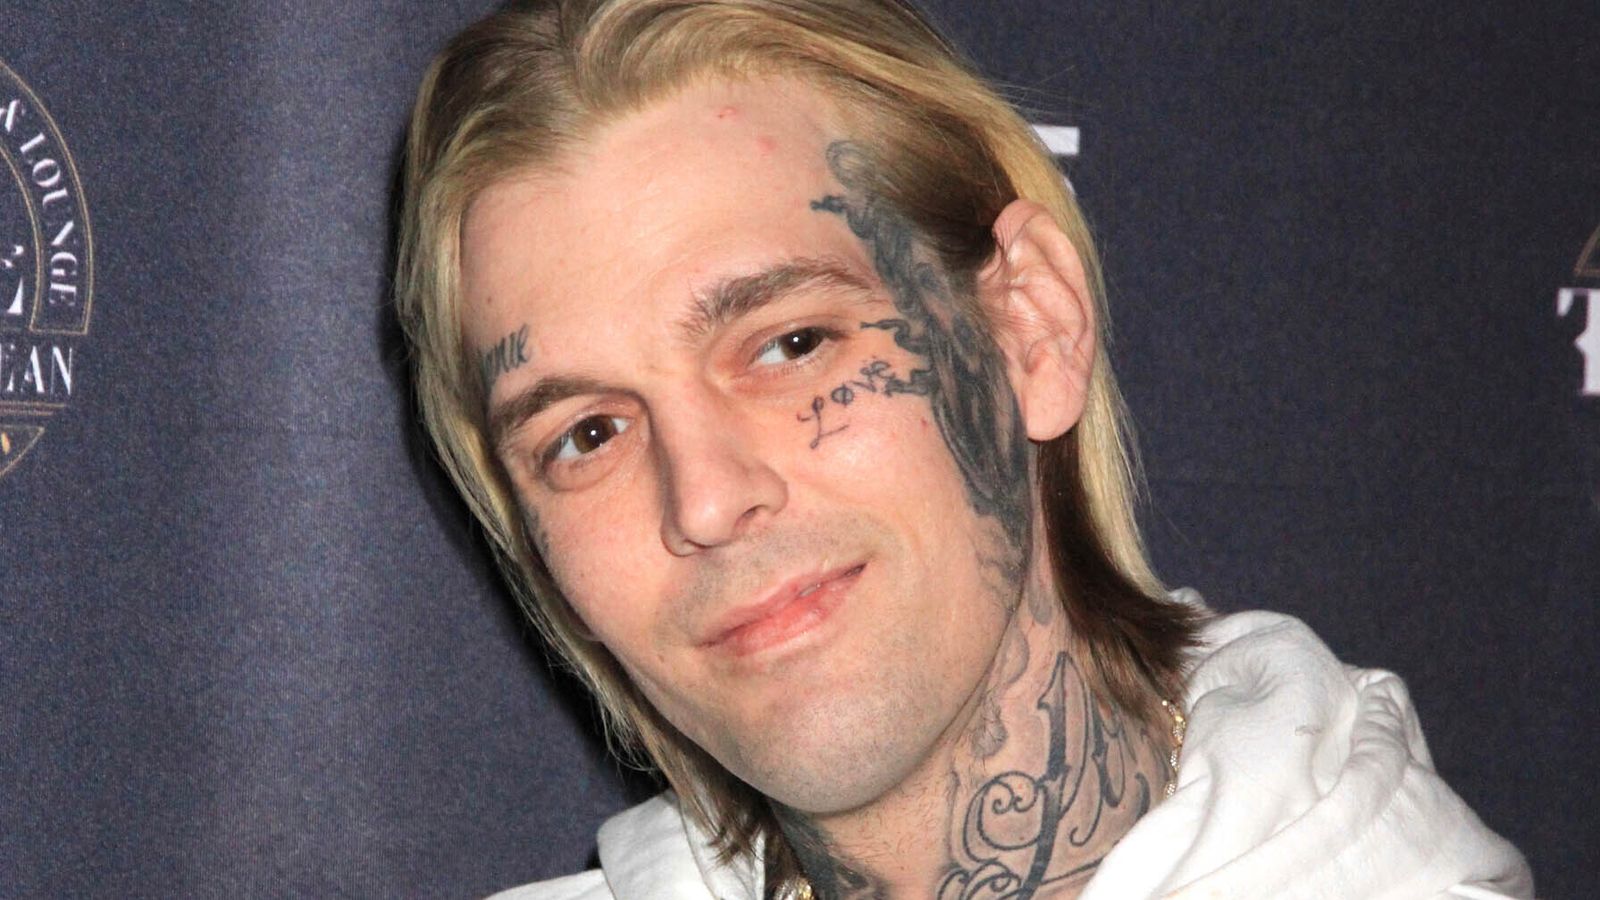 Aaron Carter drowned in his bathtub after 'inhaling compressed gas' and taking sedatives, post-mortem says